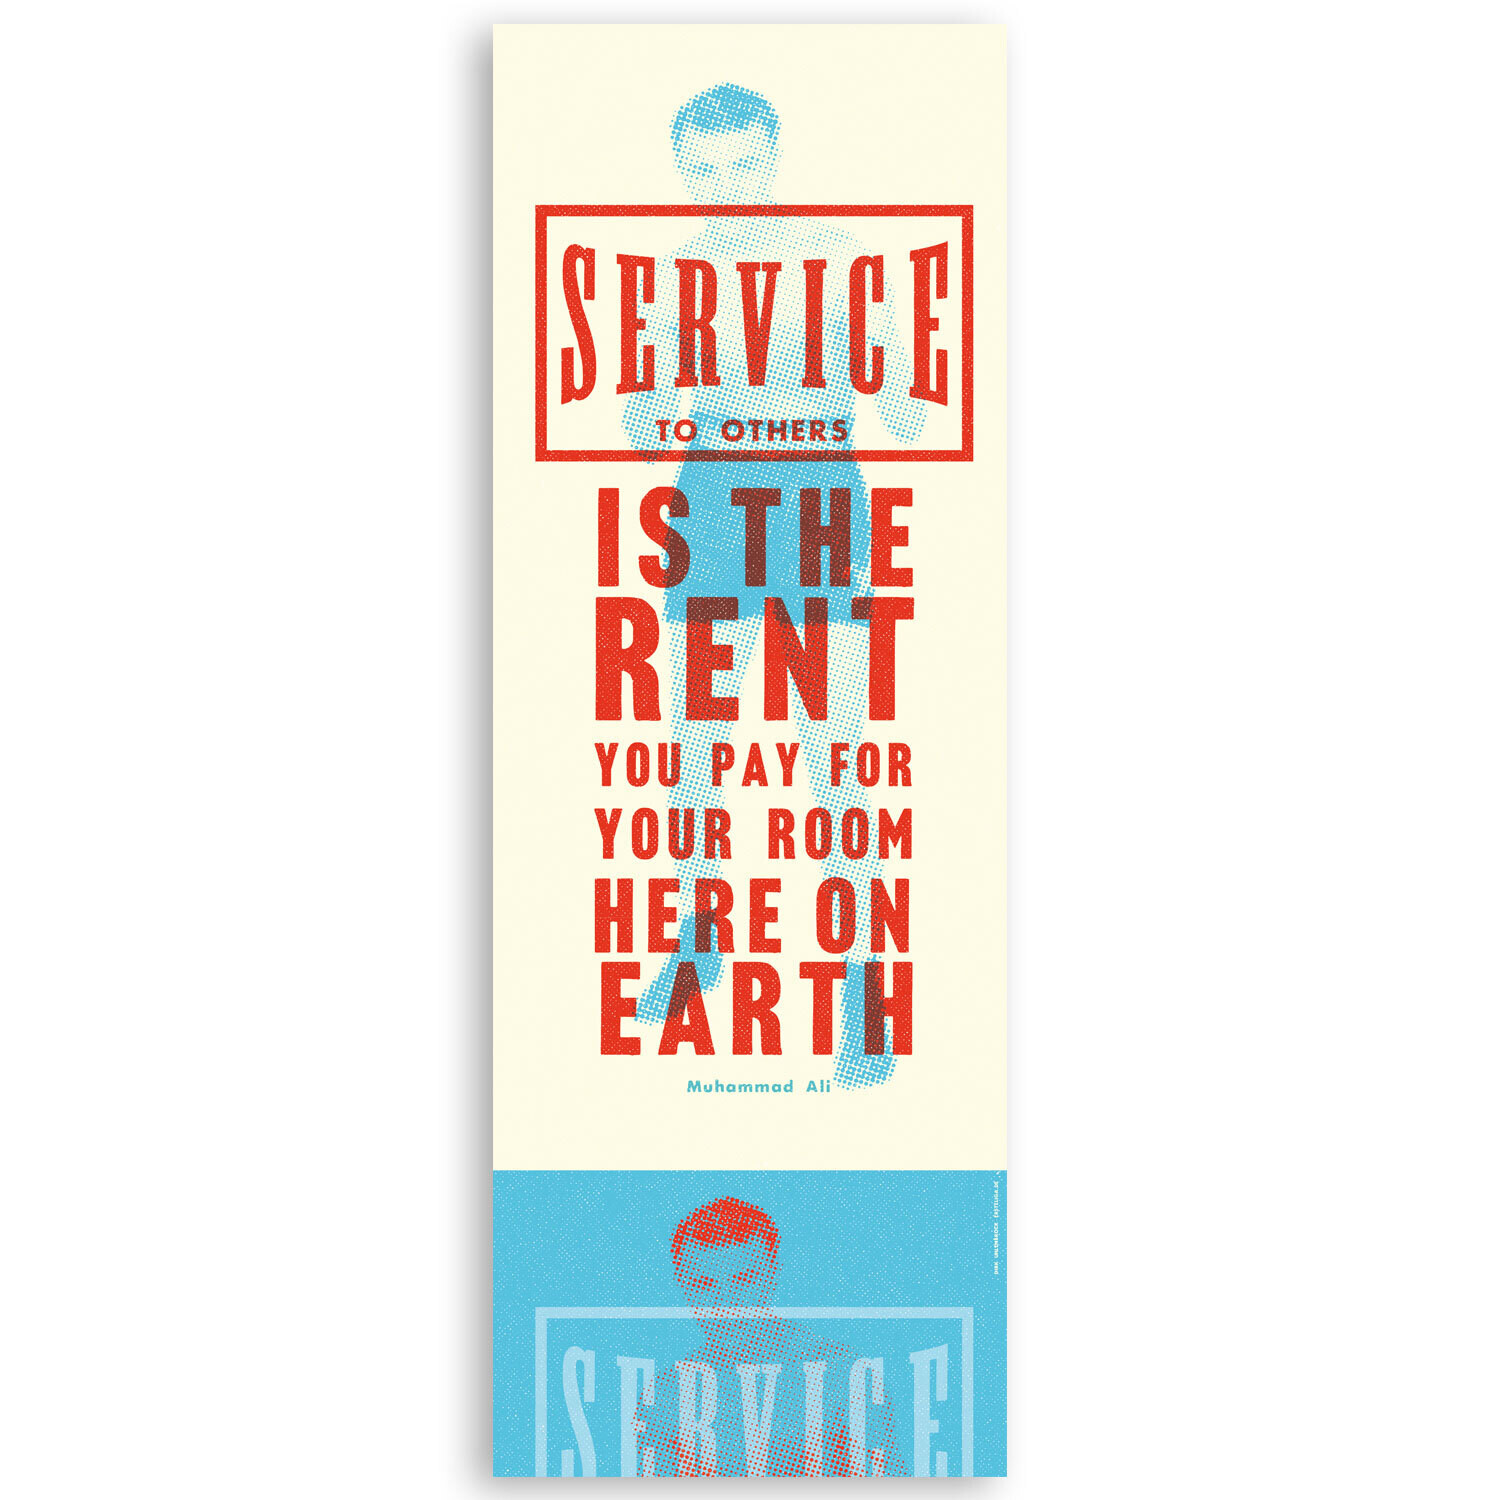 Service to others …